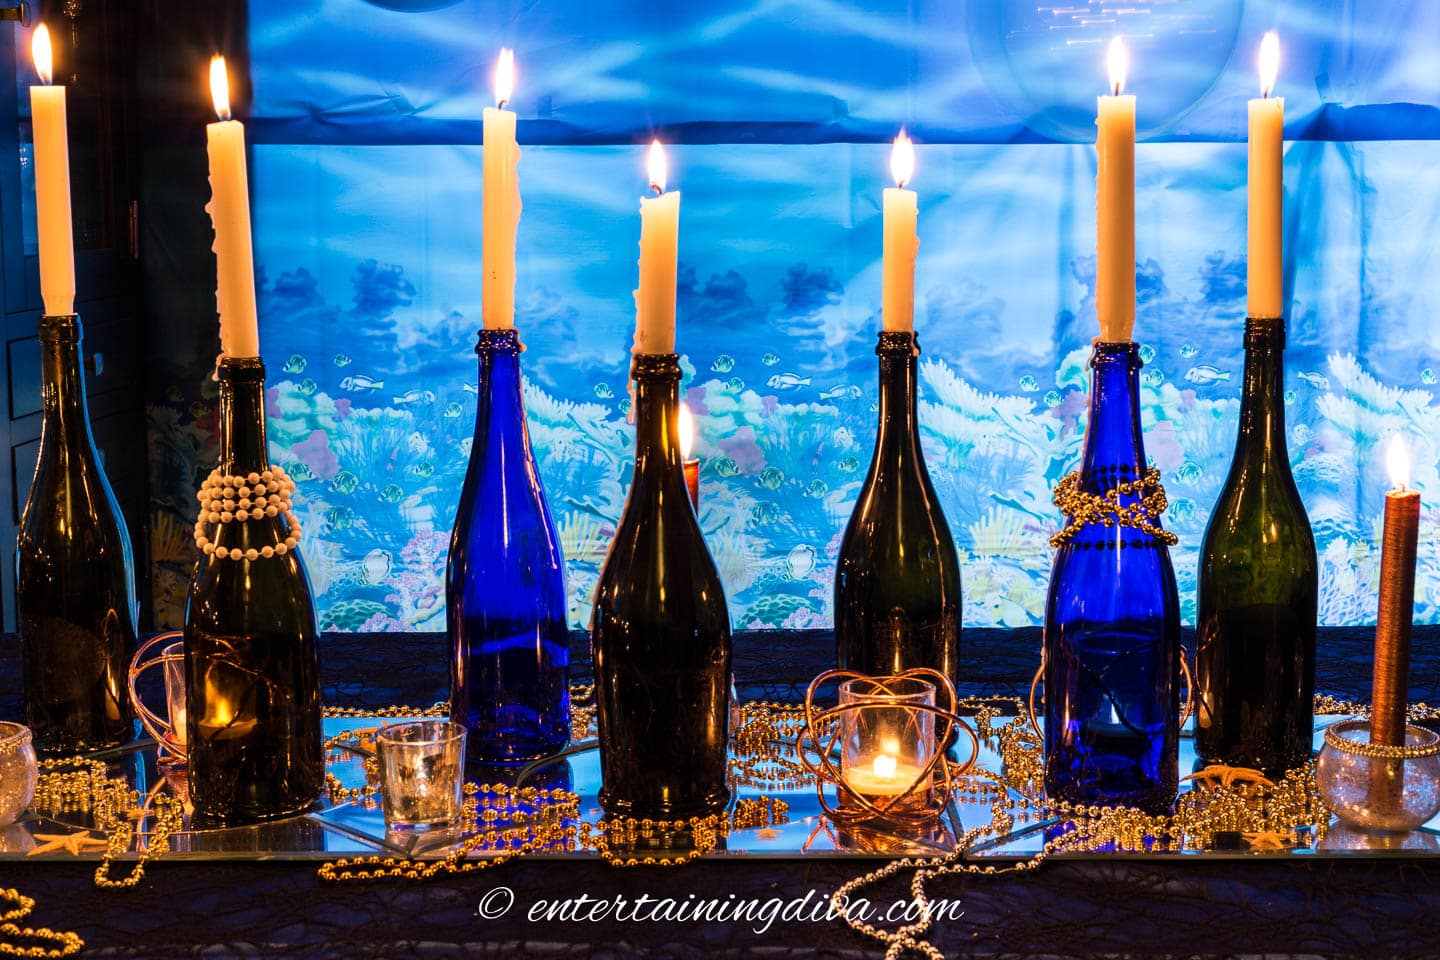 A group of black and blue wine bottles decorated with beads and candles